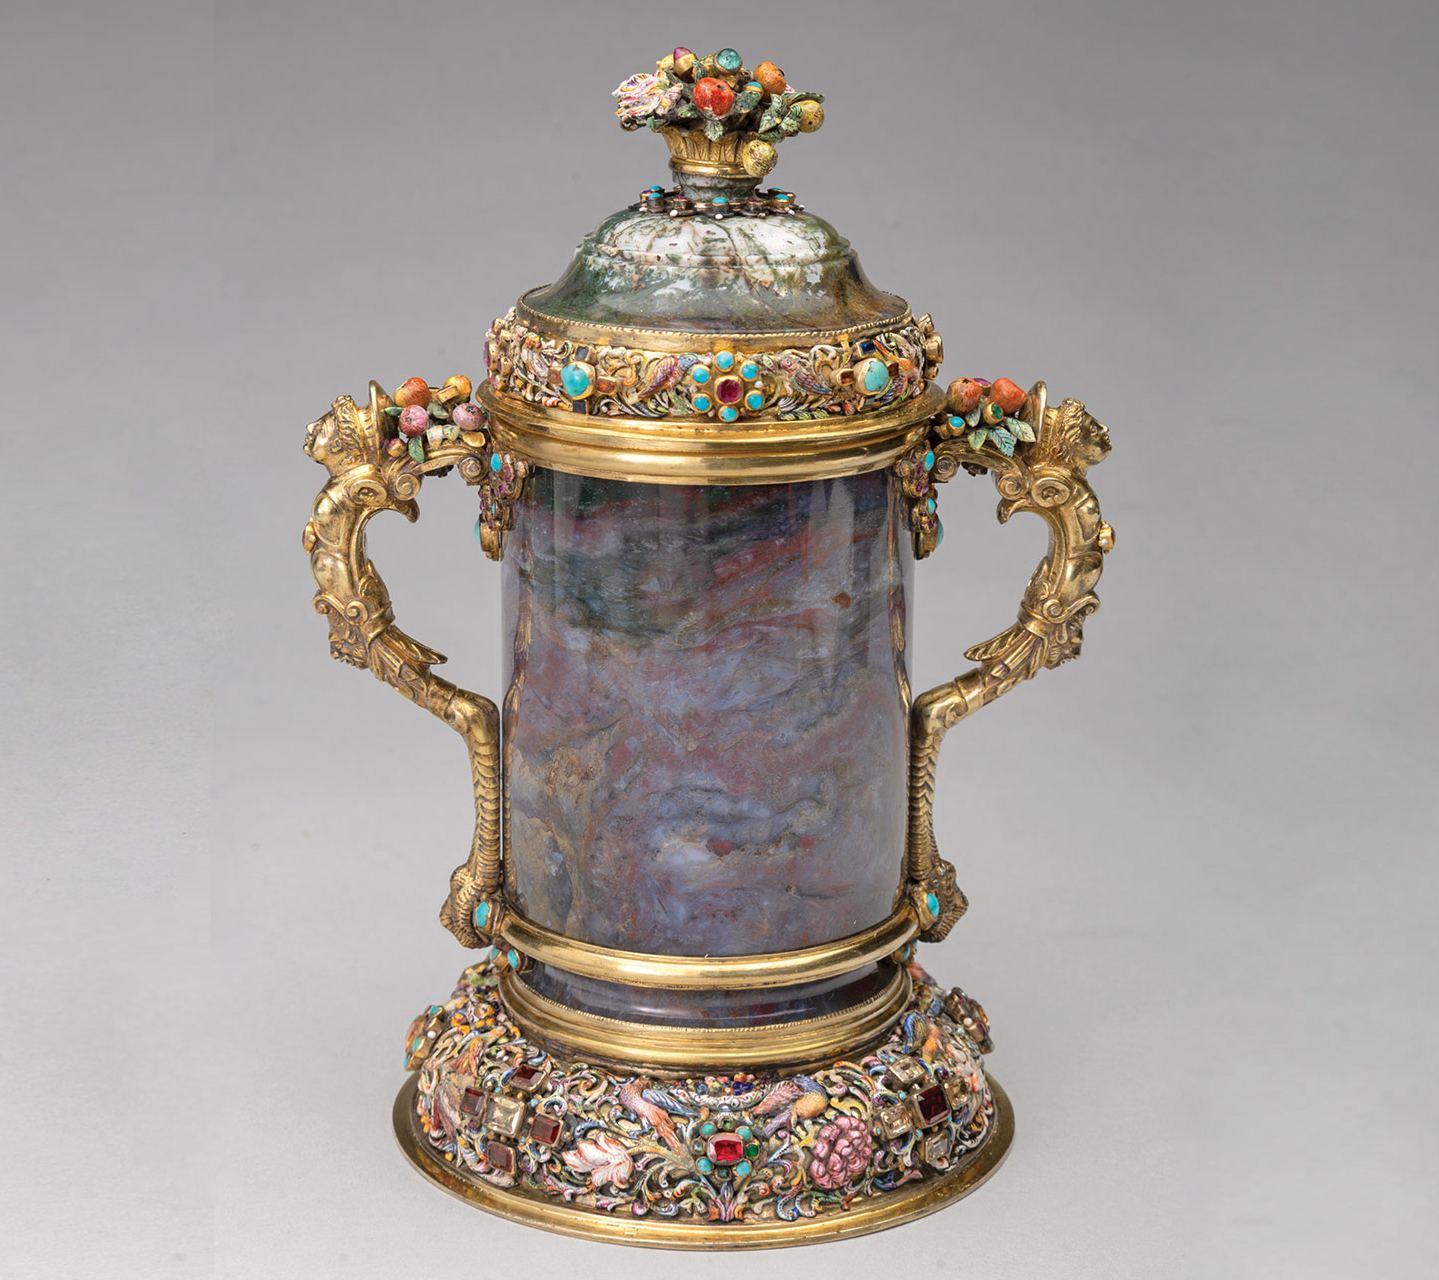 Figure 3 (left): after treatment, Possibly Johann Zeidler, Two-Handled Covered Cup, Nördlingen, Germany, mid-17th century, moss agate, silver-gilt, and enamel on copper with rubies, garnets, emeralds, sapphires, citrine, and turquoise. Taft Museum of Art, 1931.267